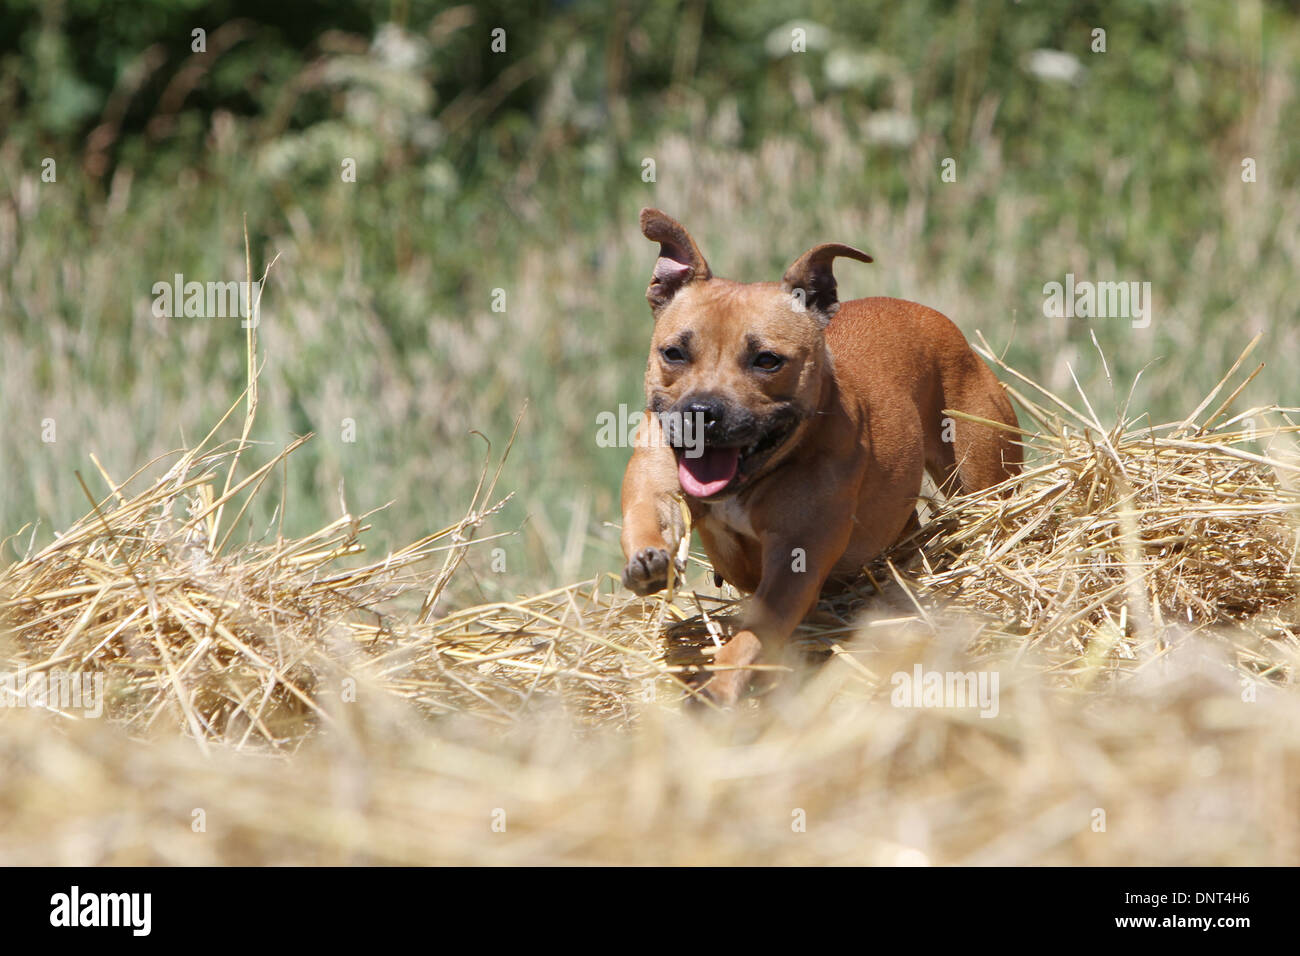 dog Staffordshire Bull Terrier / Staffie   adult jumping in a field Stock Photo